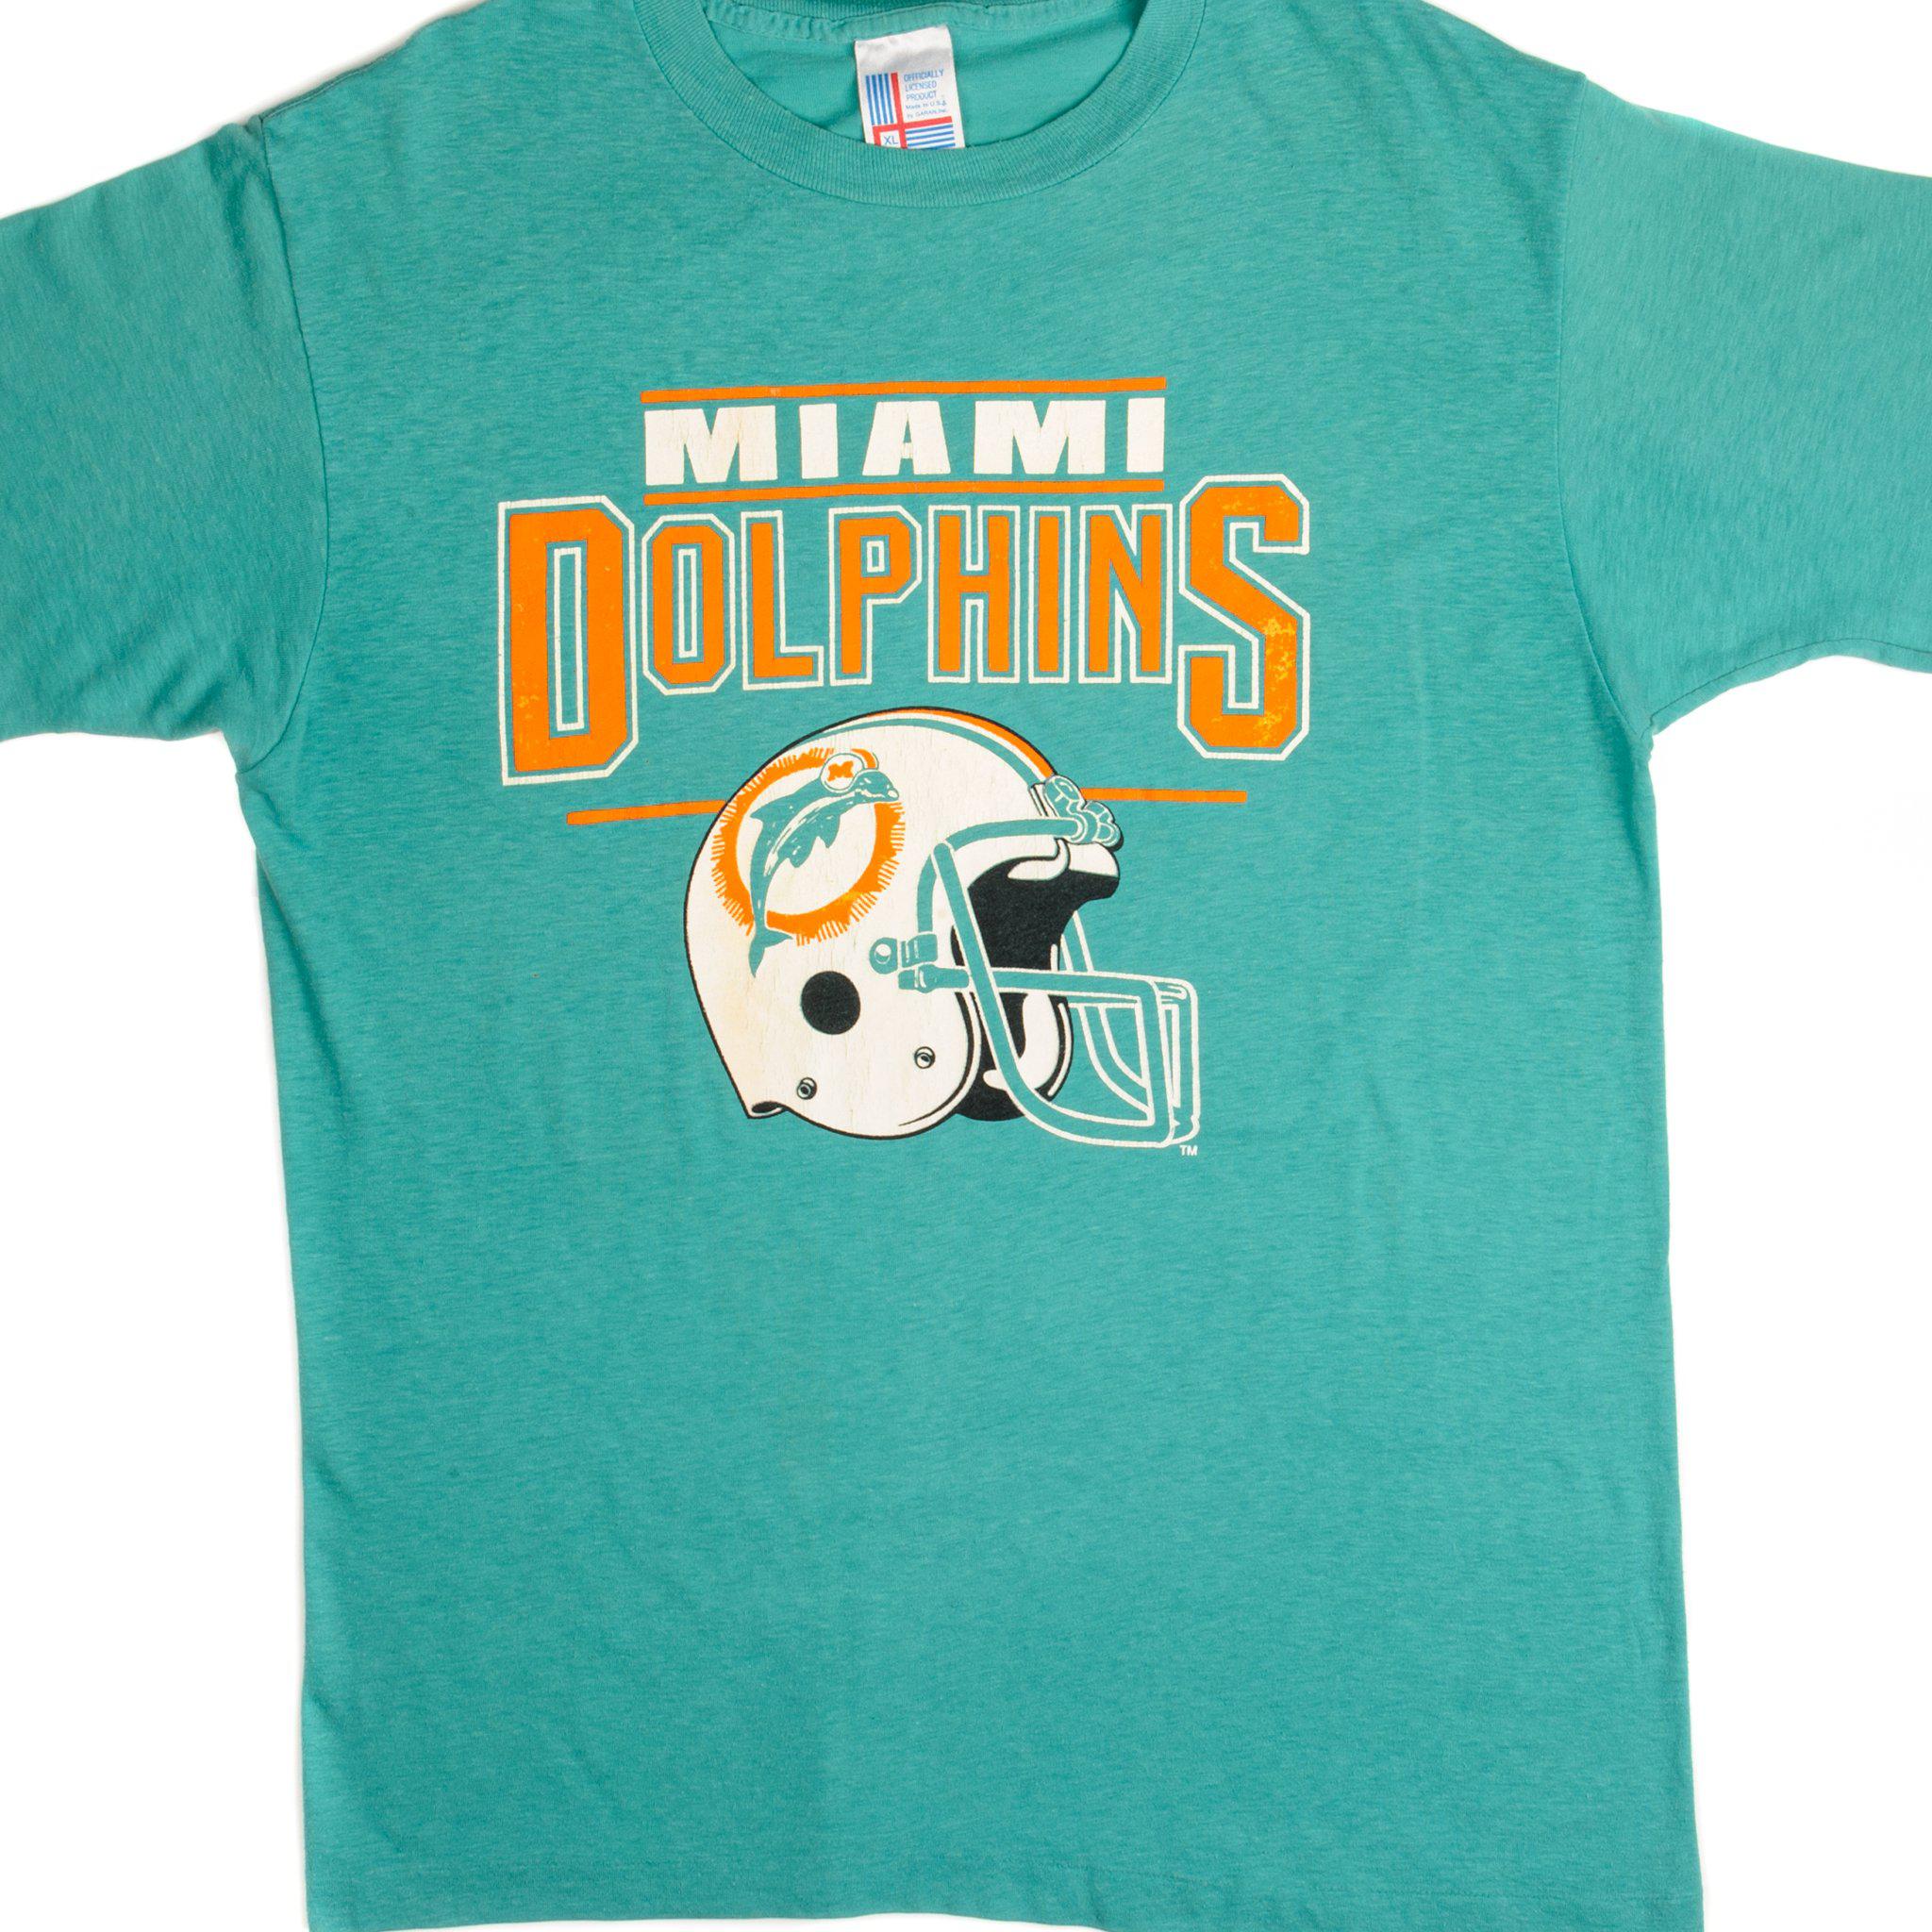 Vintage NFL Miami Dolphins Tee Shirt Size Medium Made in USA